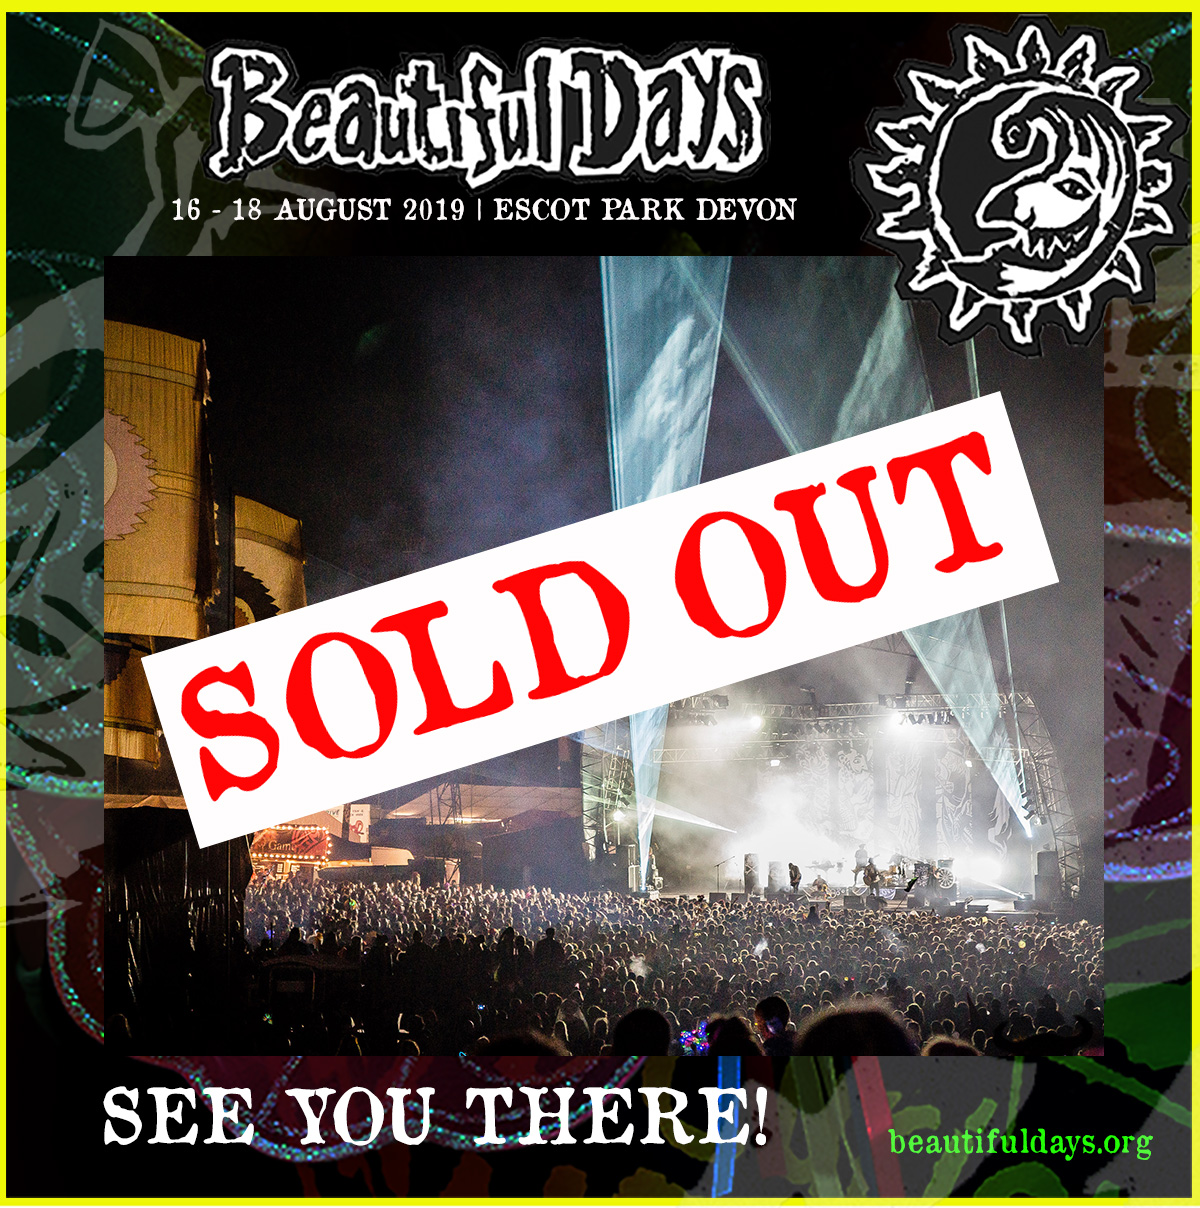 2019 TICKETS SOLD OUT